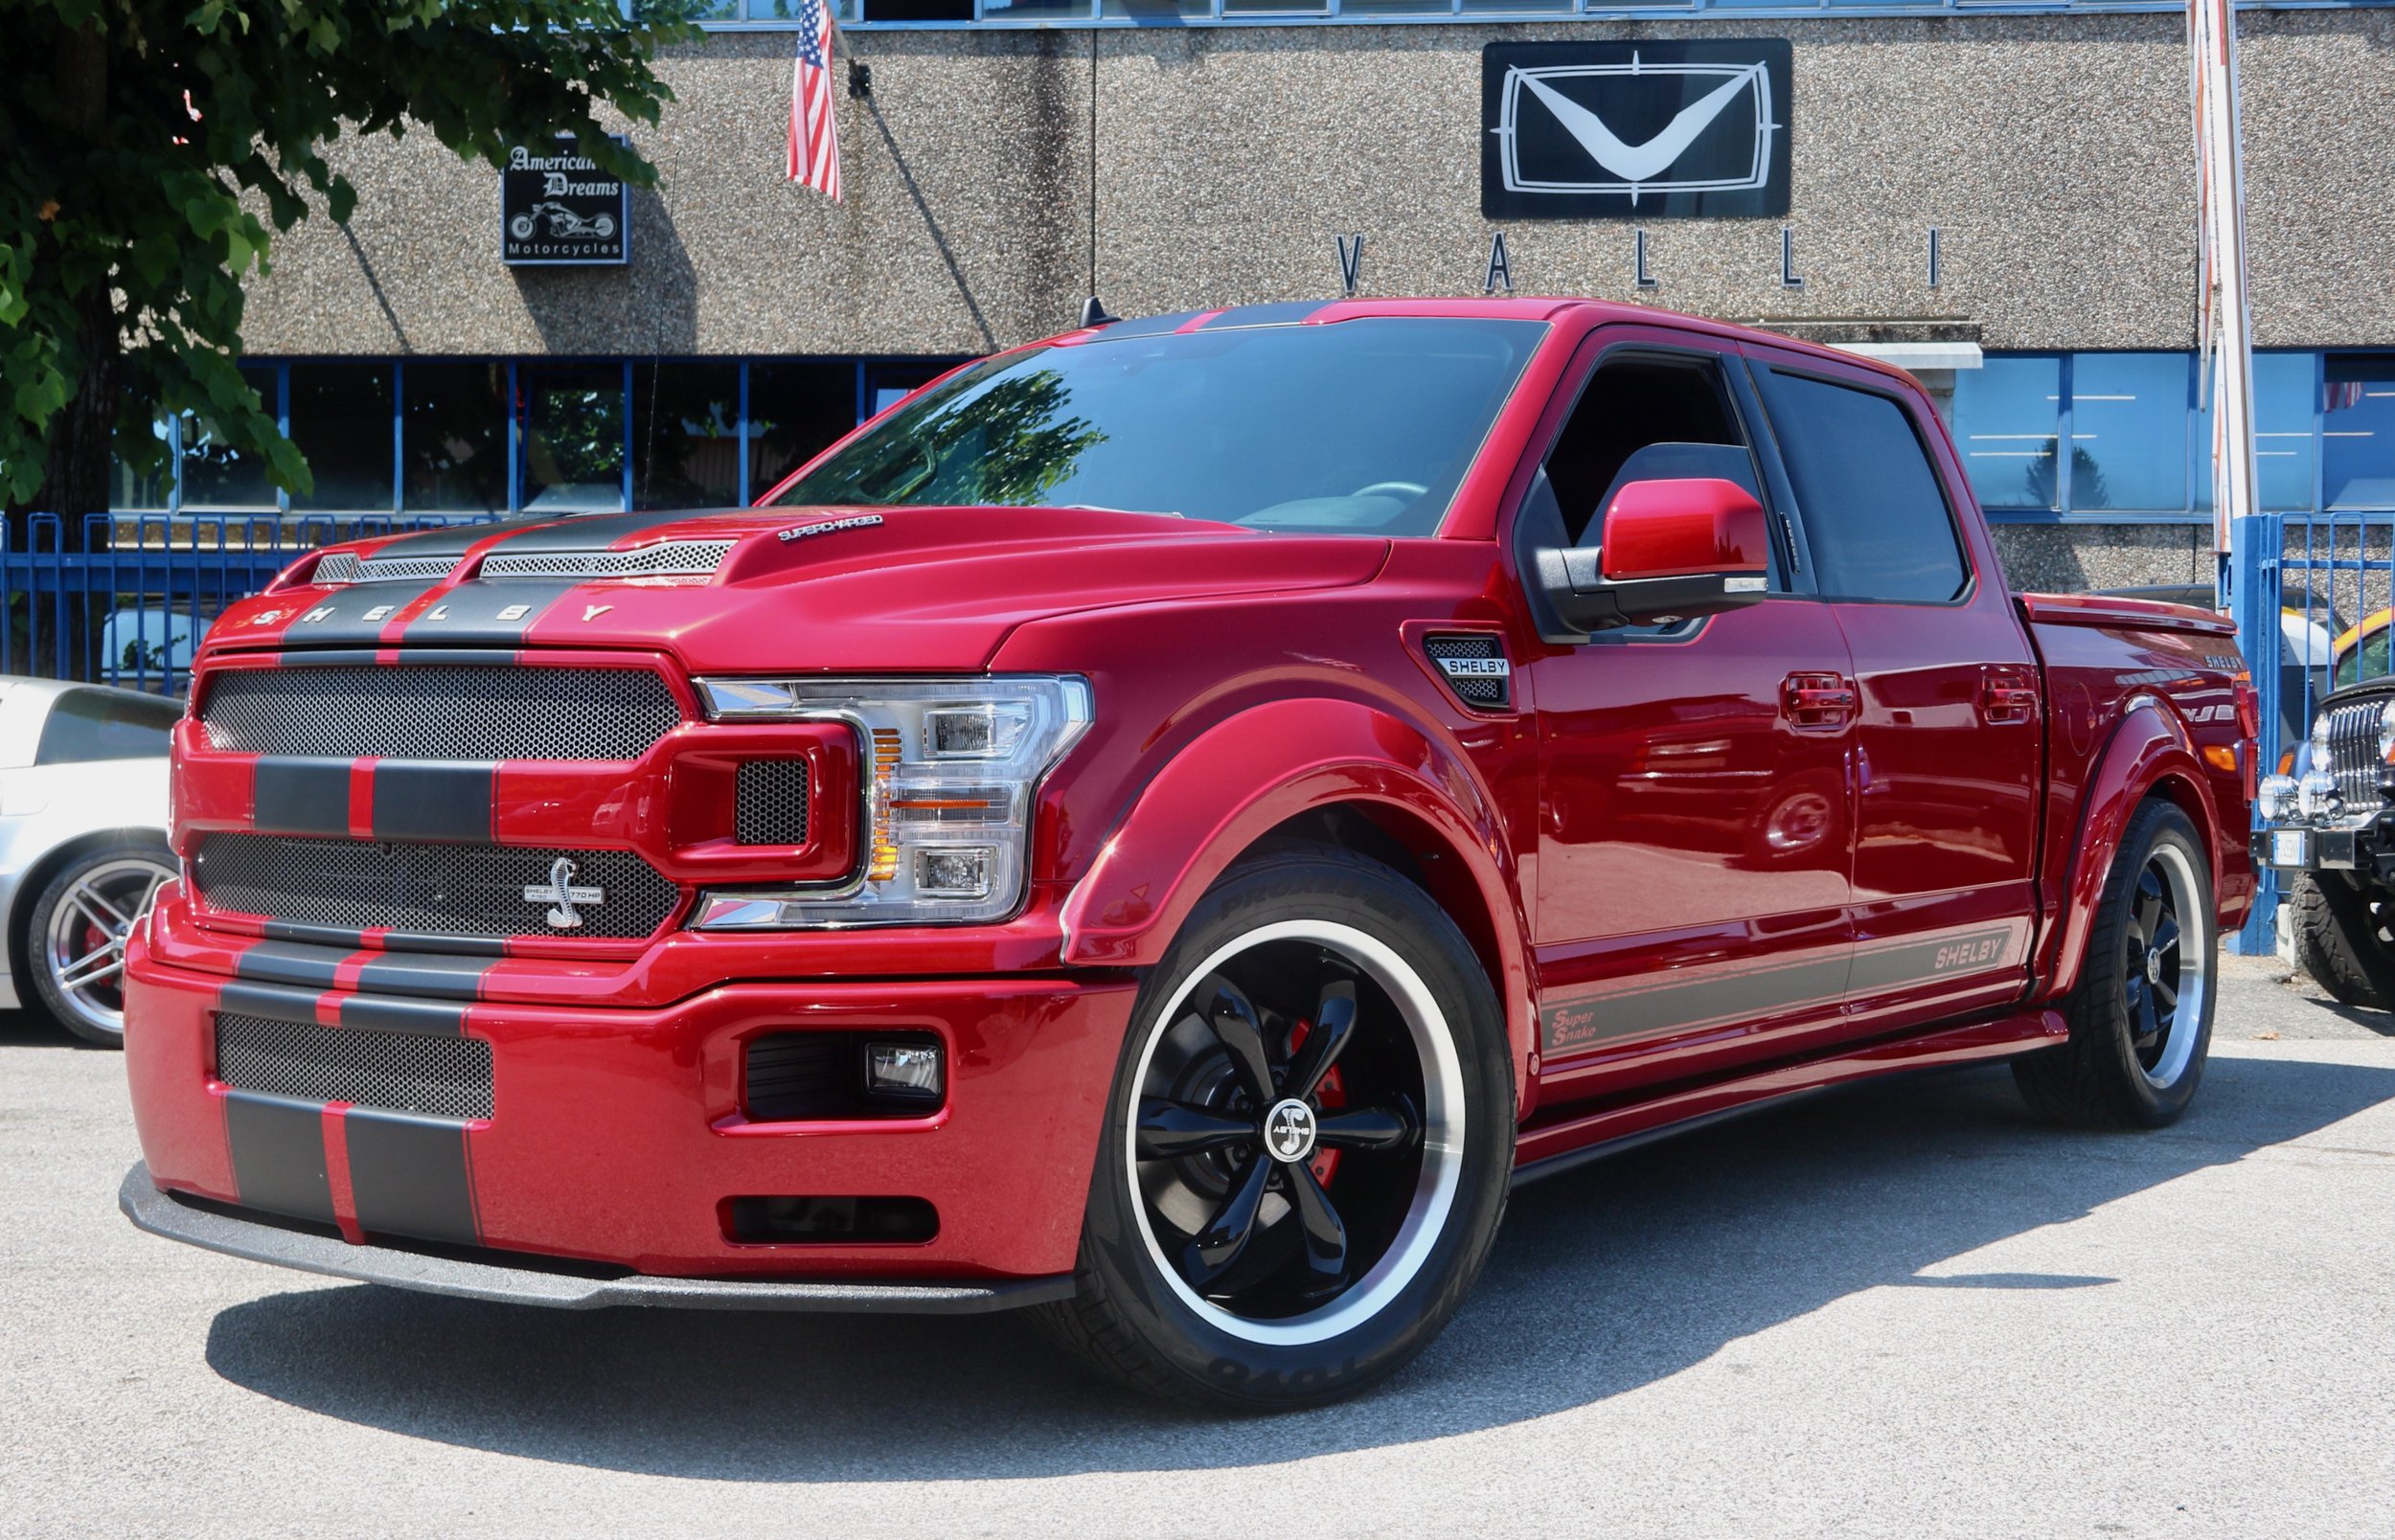 04 2020 Ford F150 Shelby Super Snake C.S.M. 20STS0259 Rapid Red VALLIstore Wide-Body.jpeg